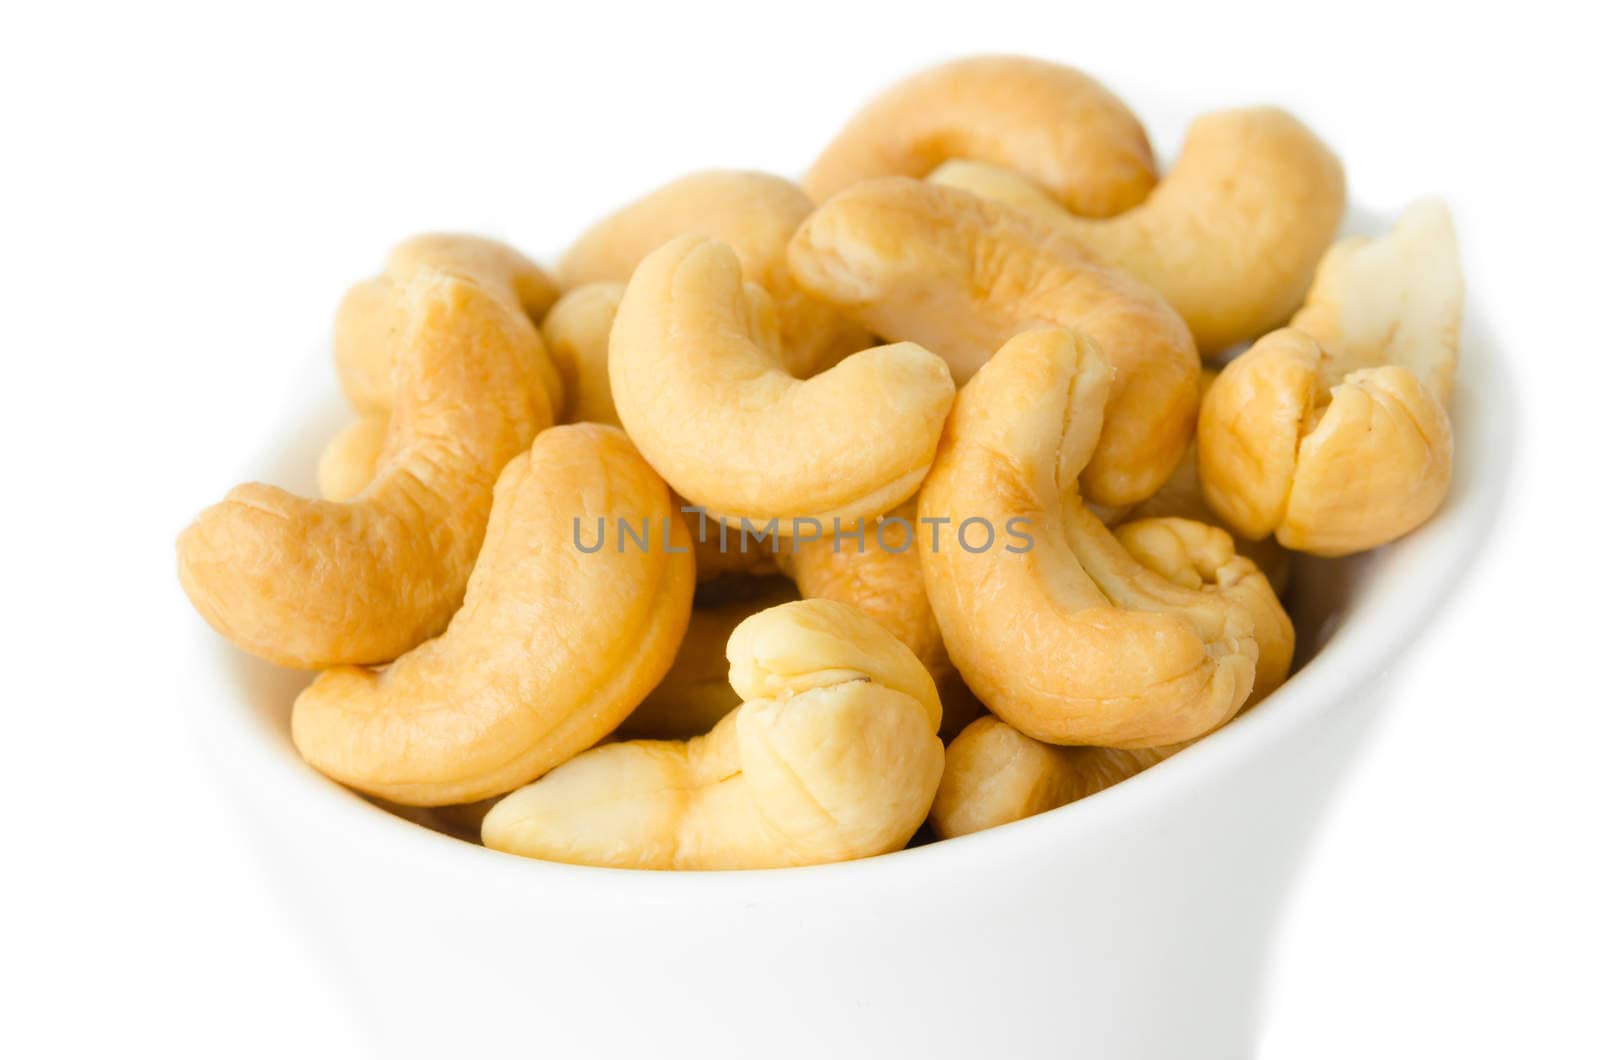 Cashew nuts in a white bowl. Isolated on white.